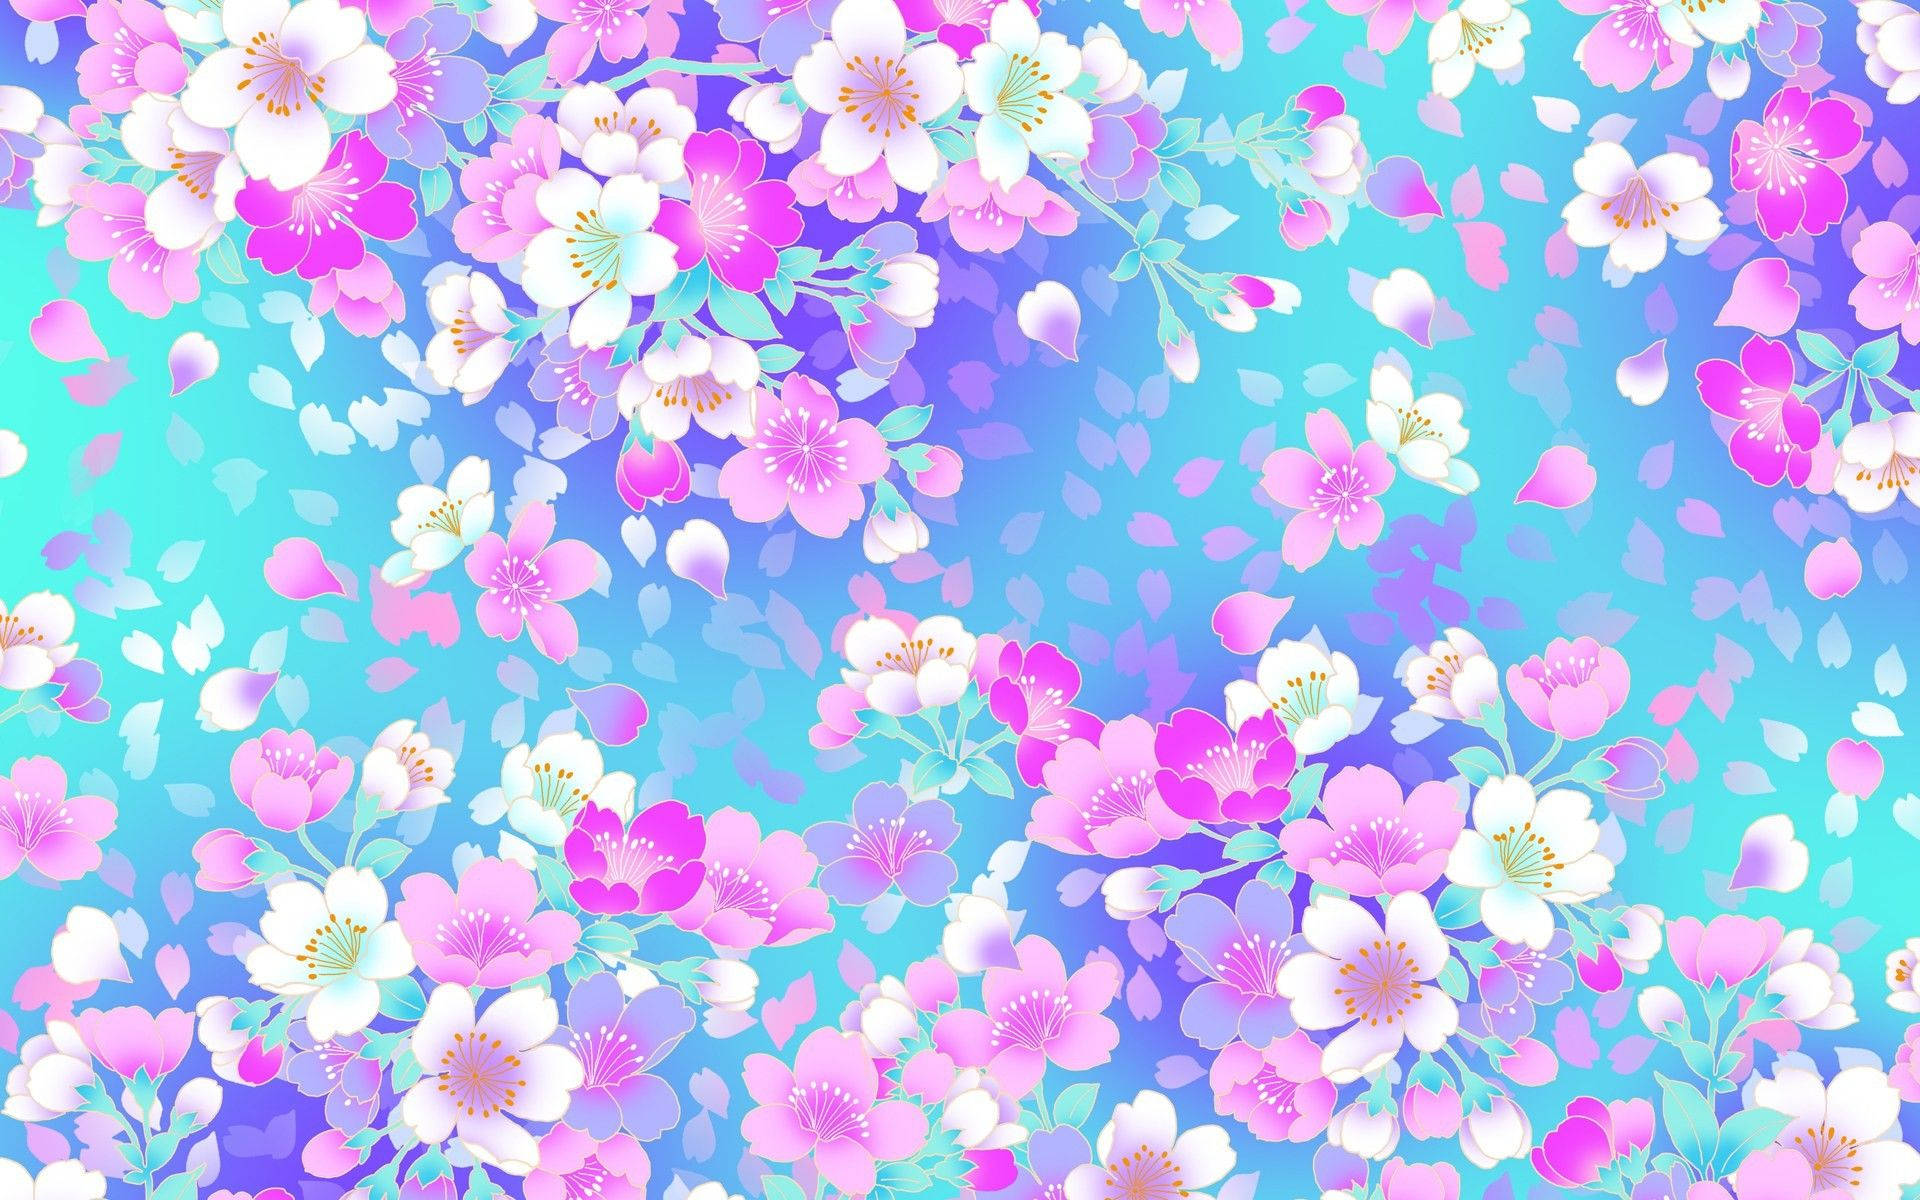 Simple Girly Backgrounds